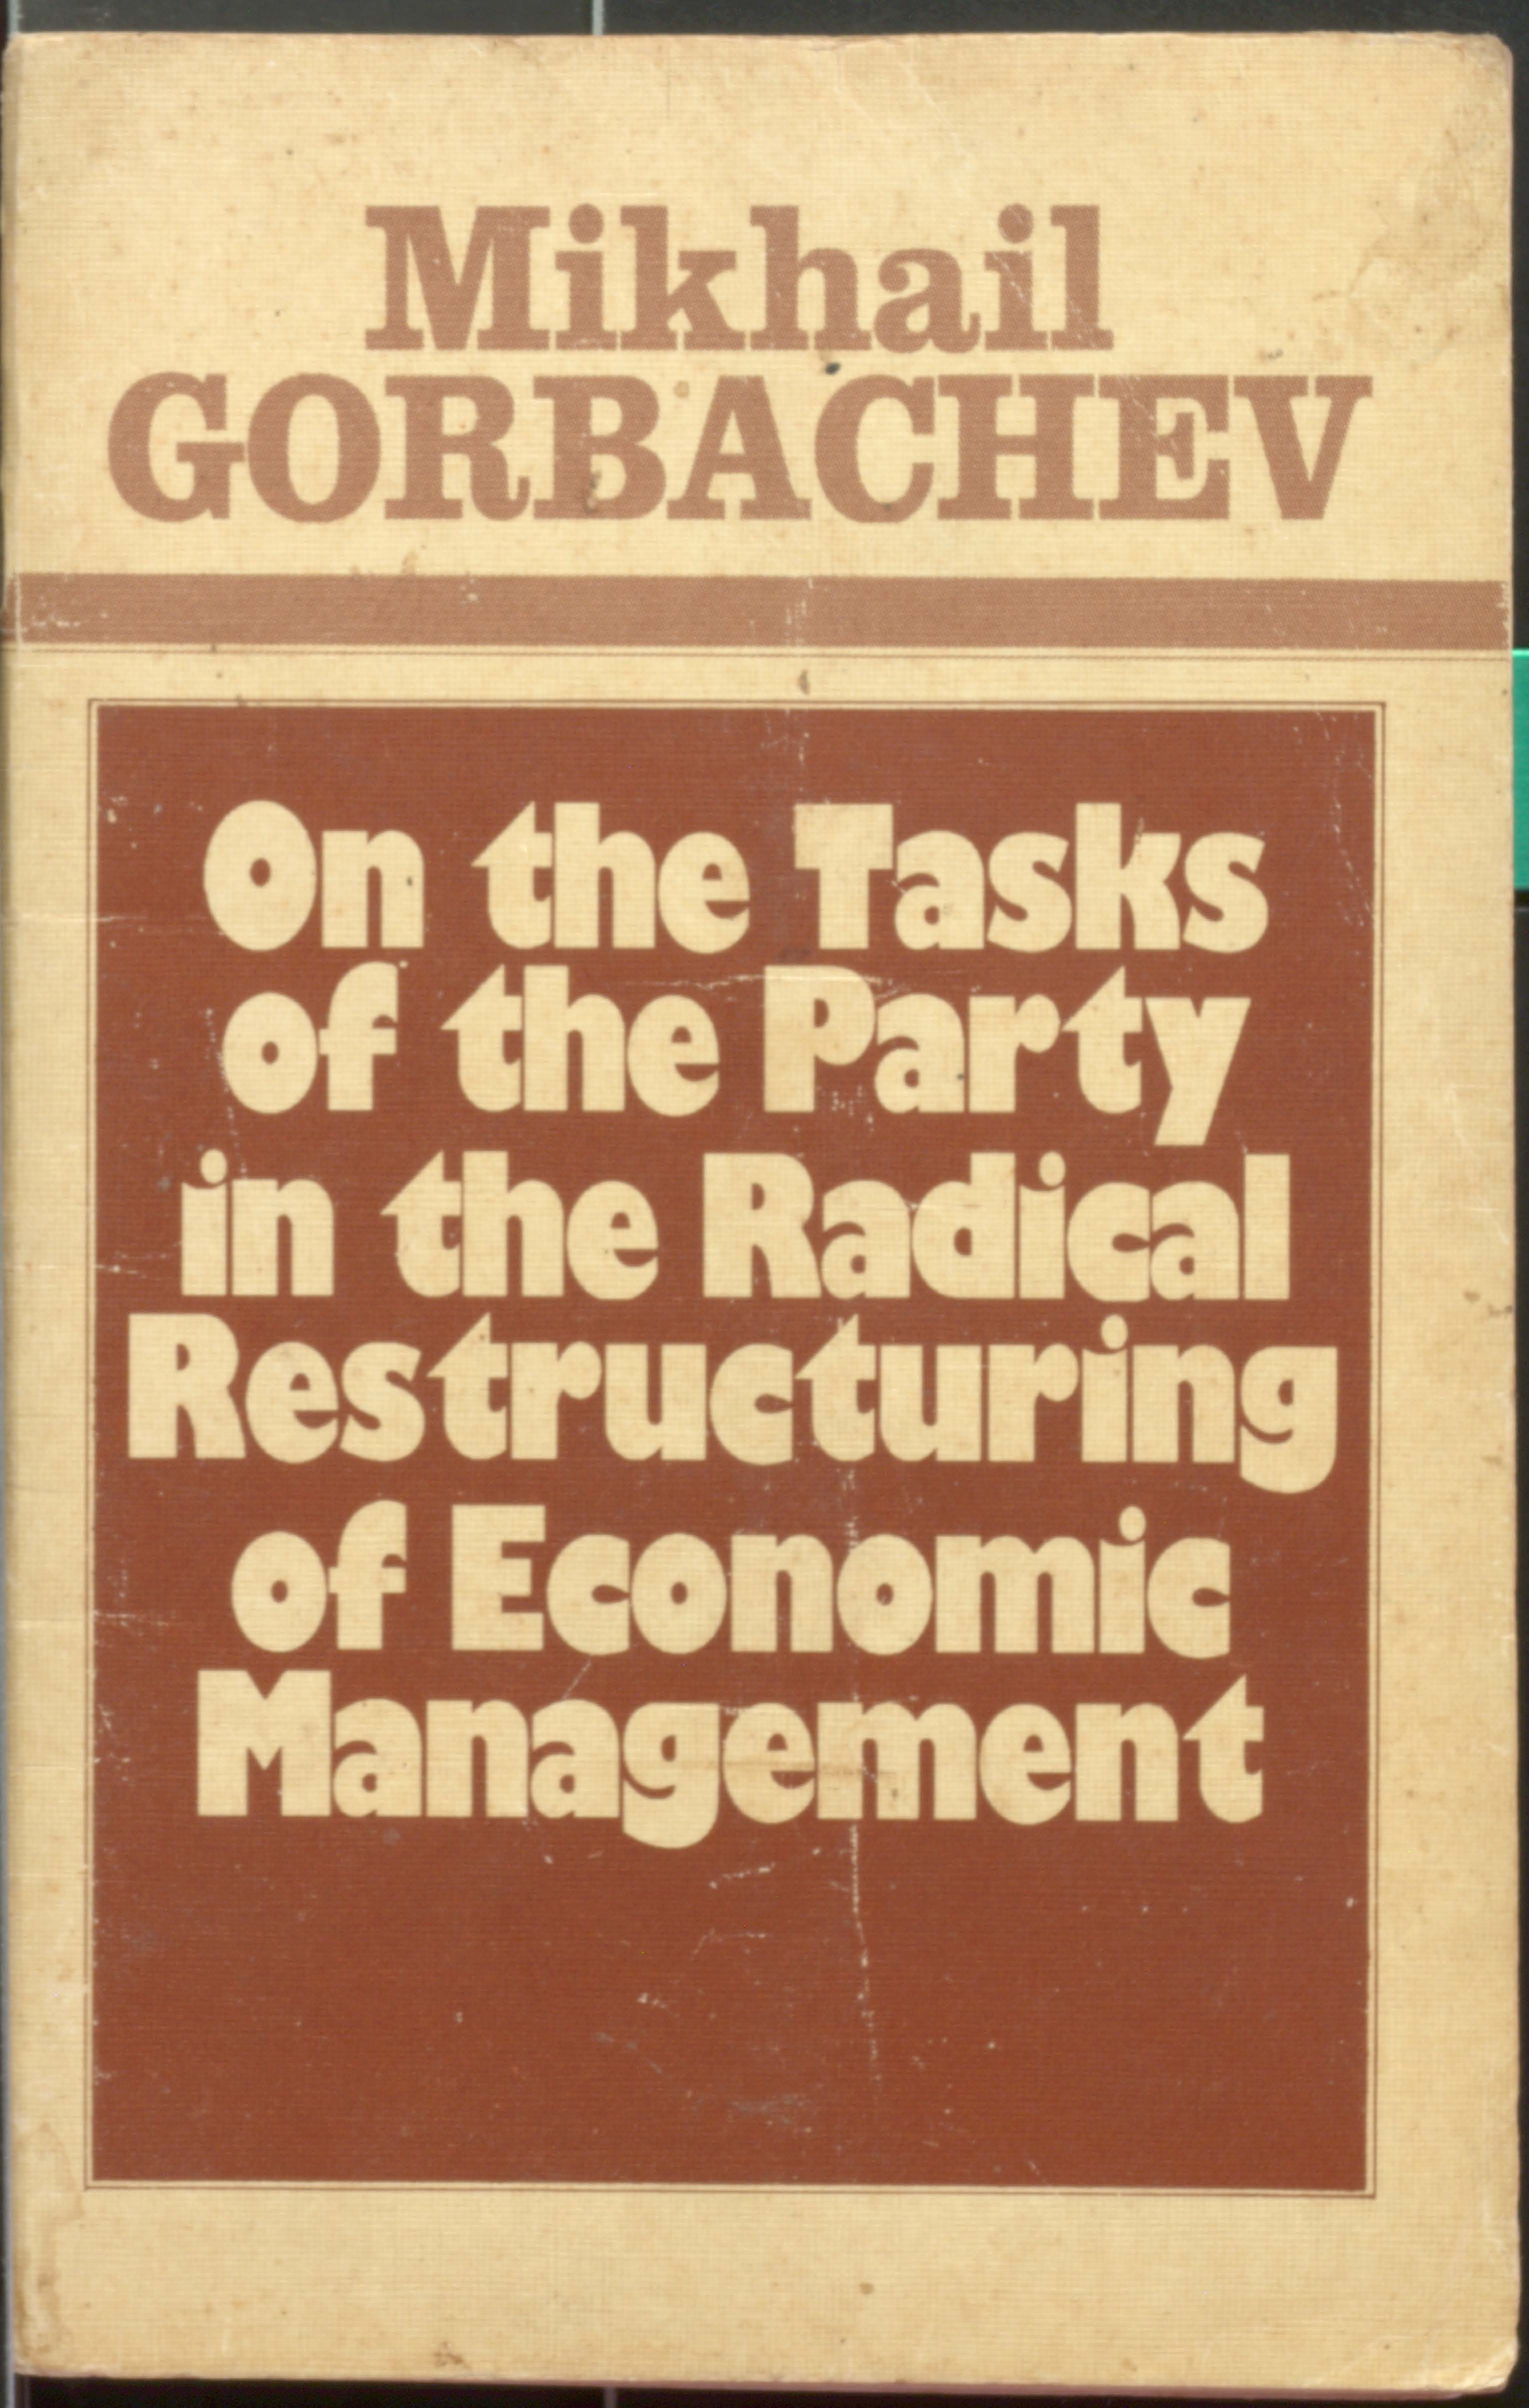 Mikhail gorbachev on the taska of the party in the radical restructuring of economic management